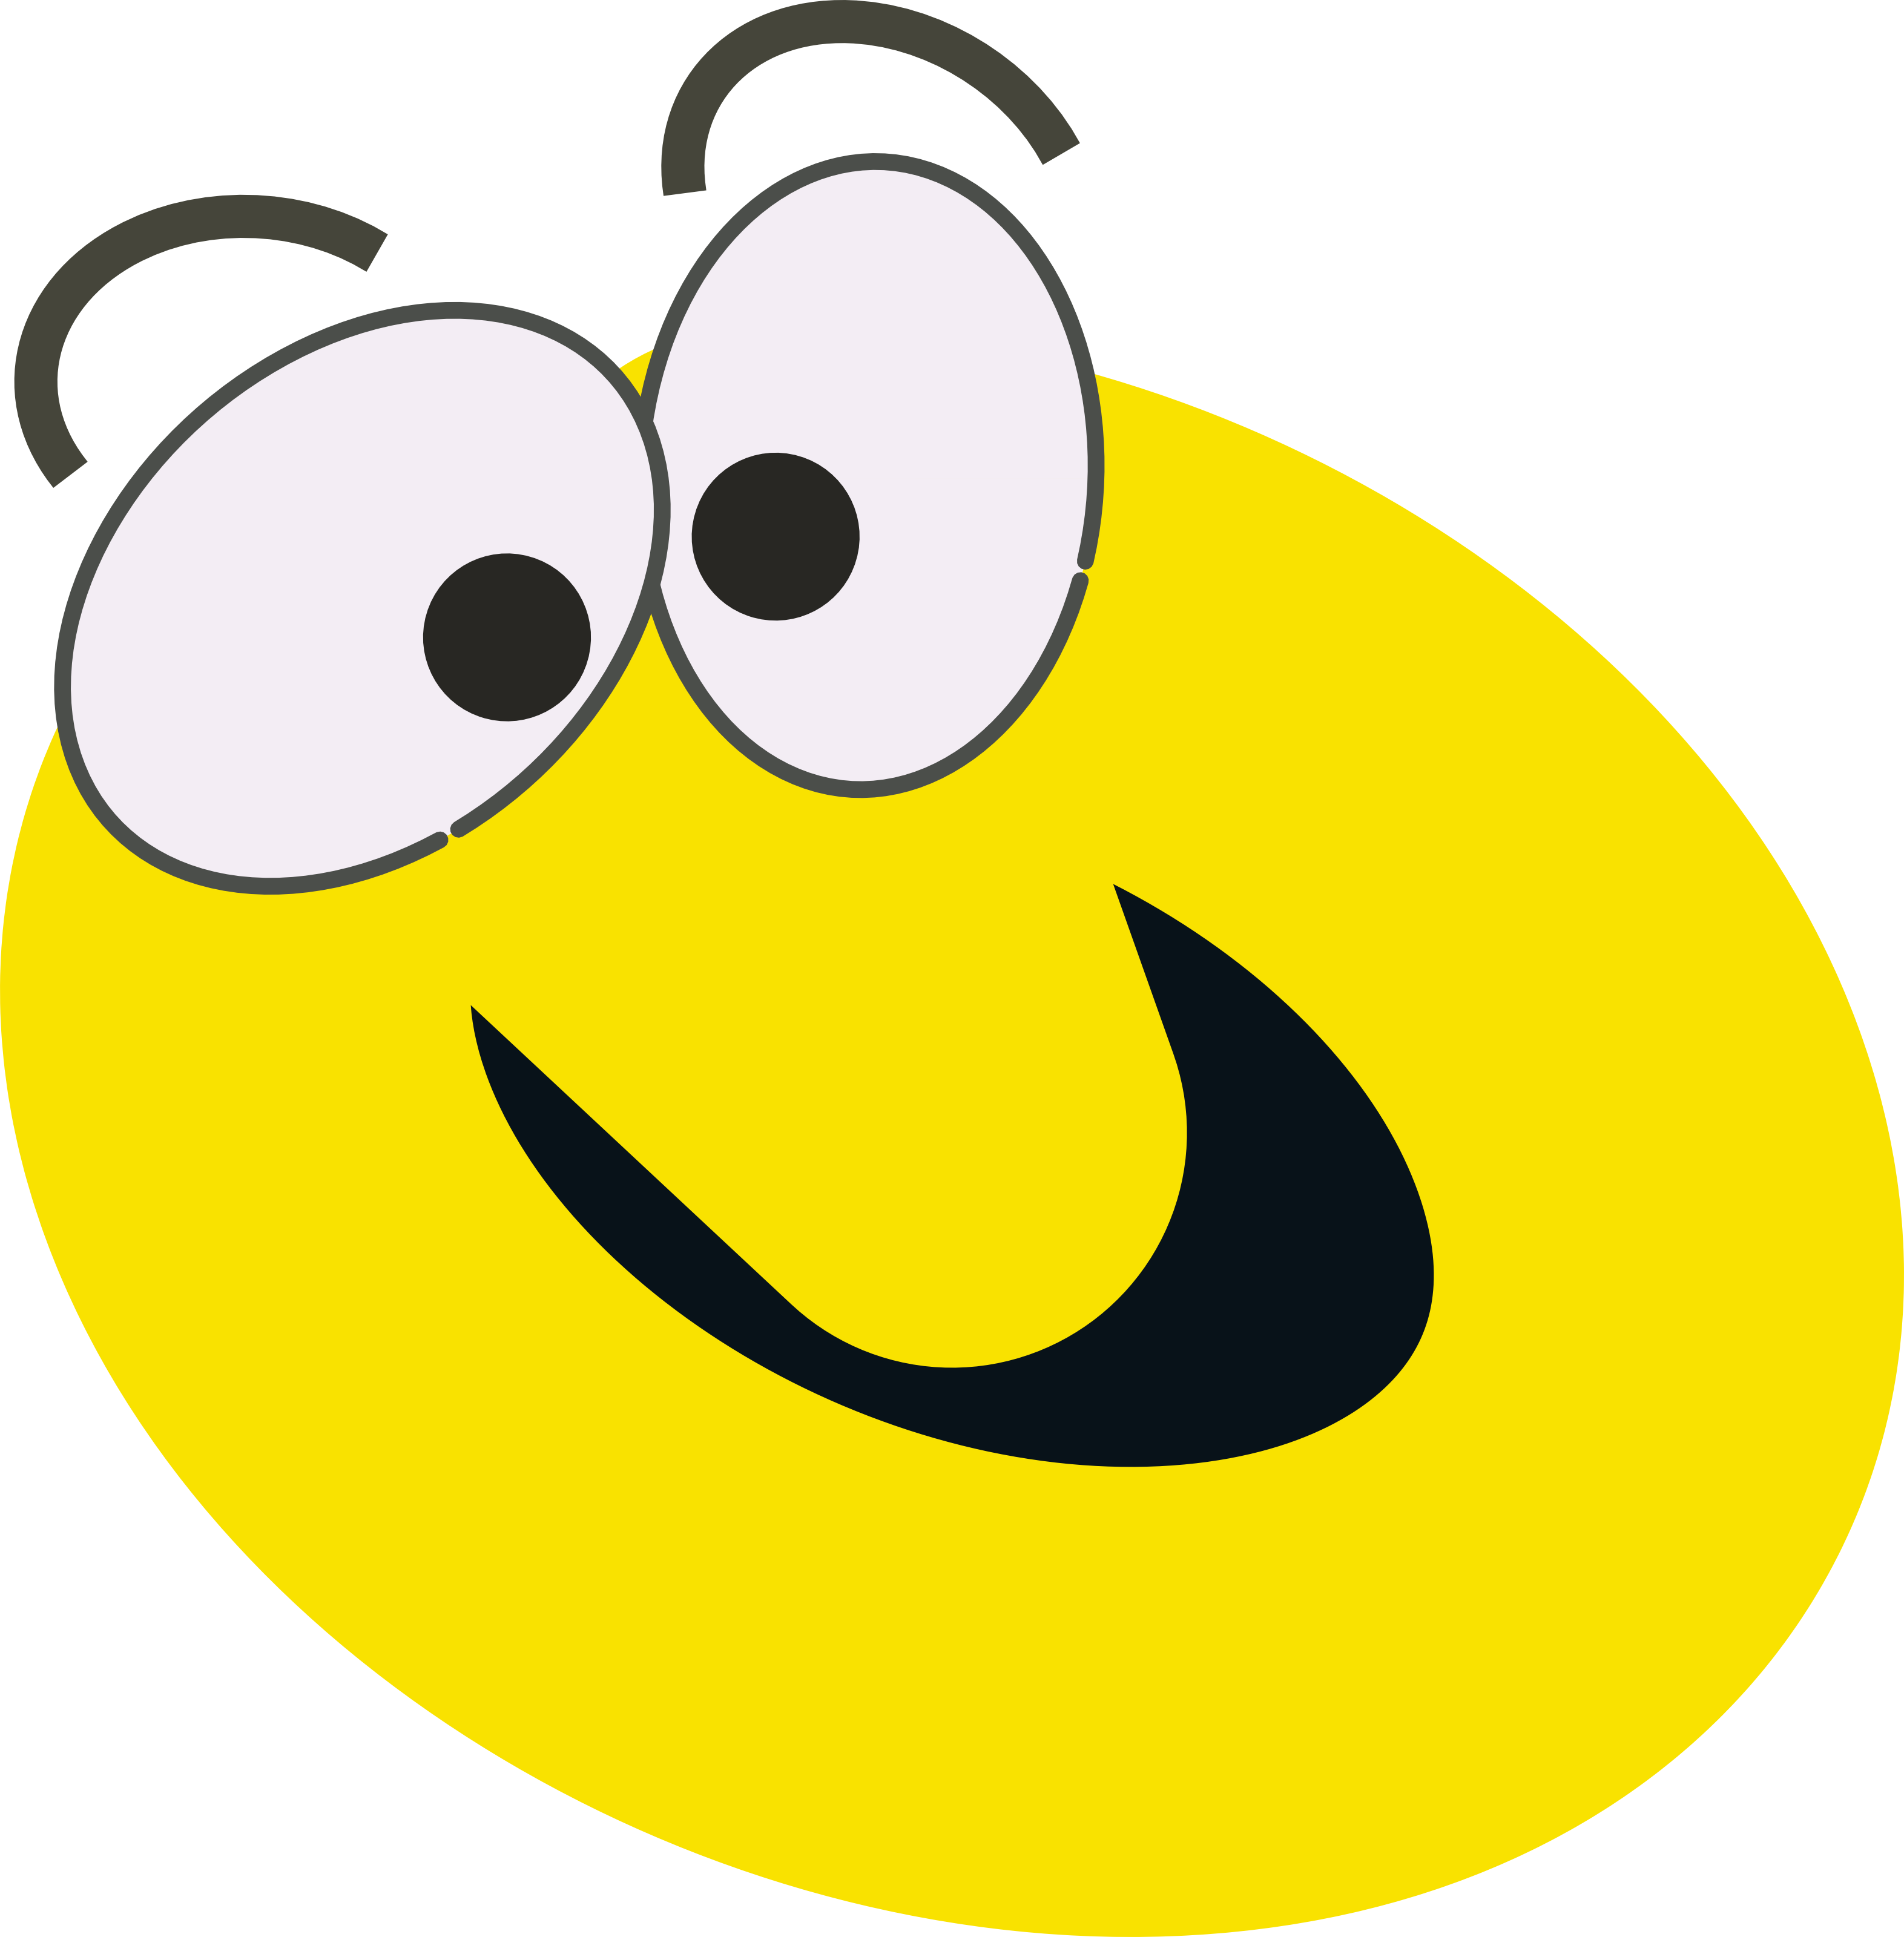 free clipart images happy face - photo #5